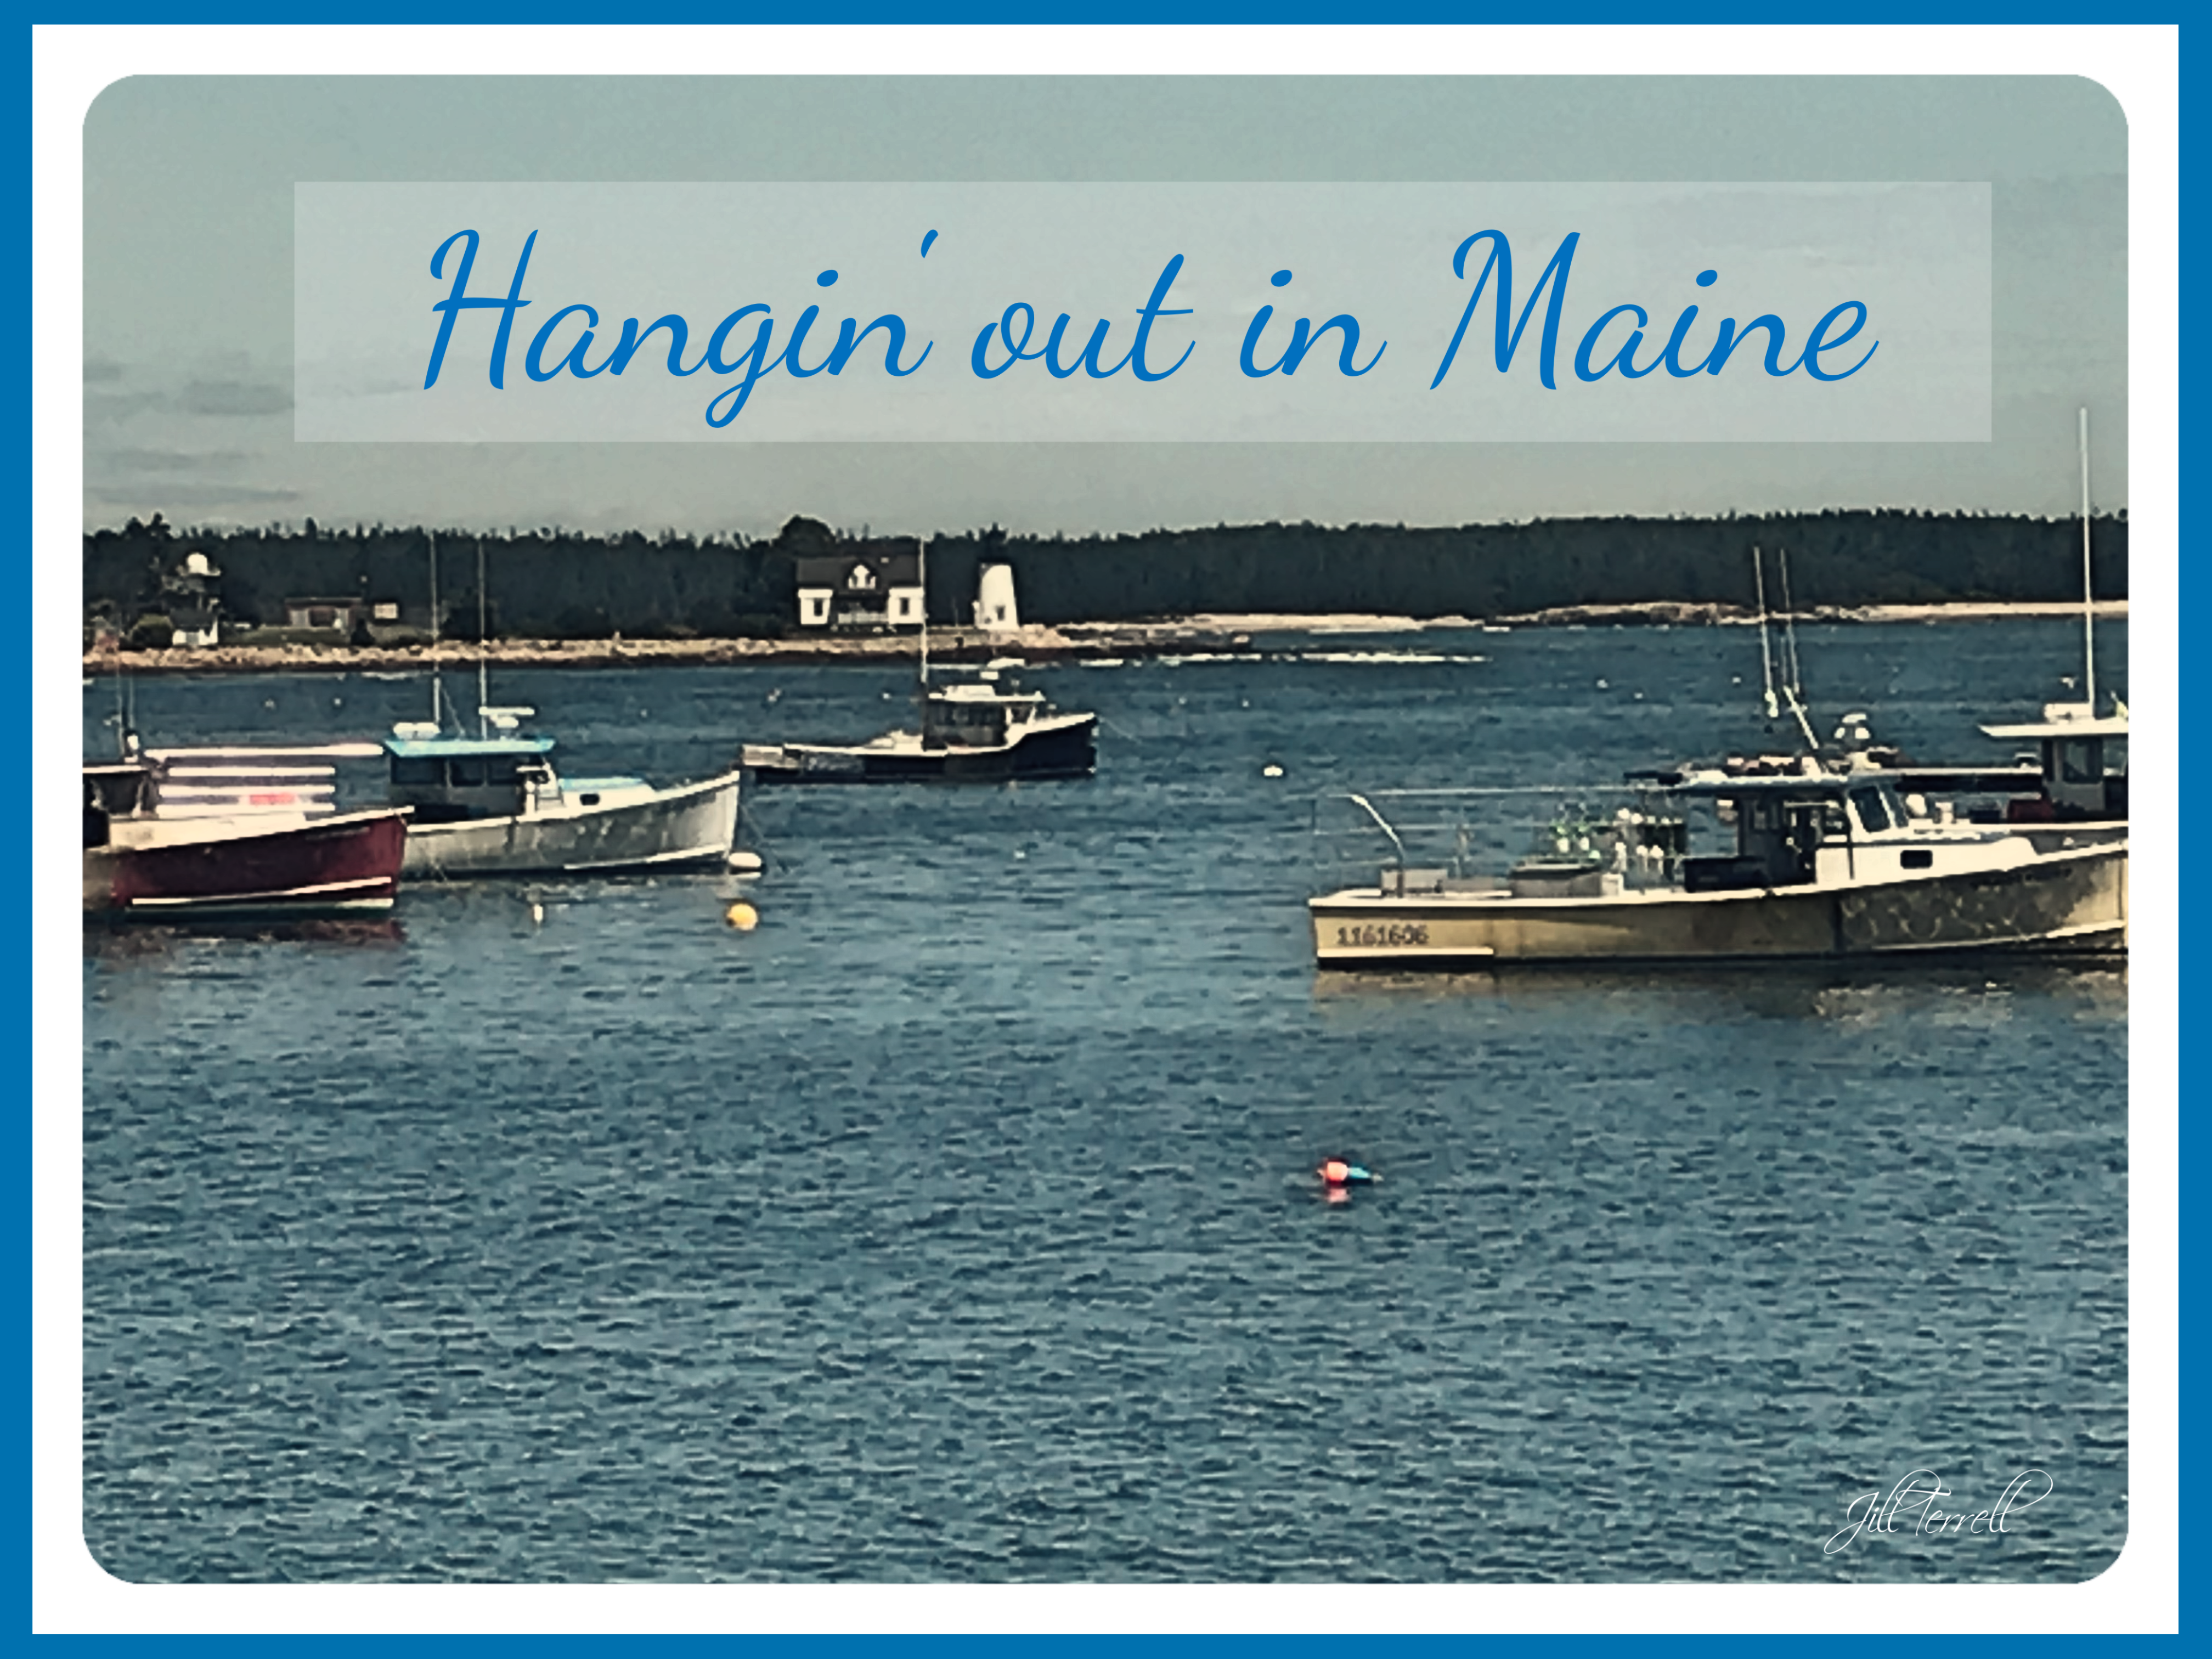 Hangin' out in Maine